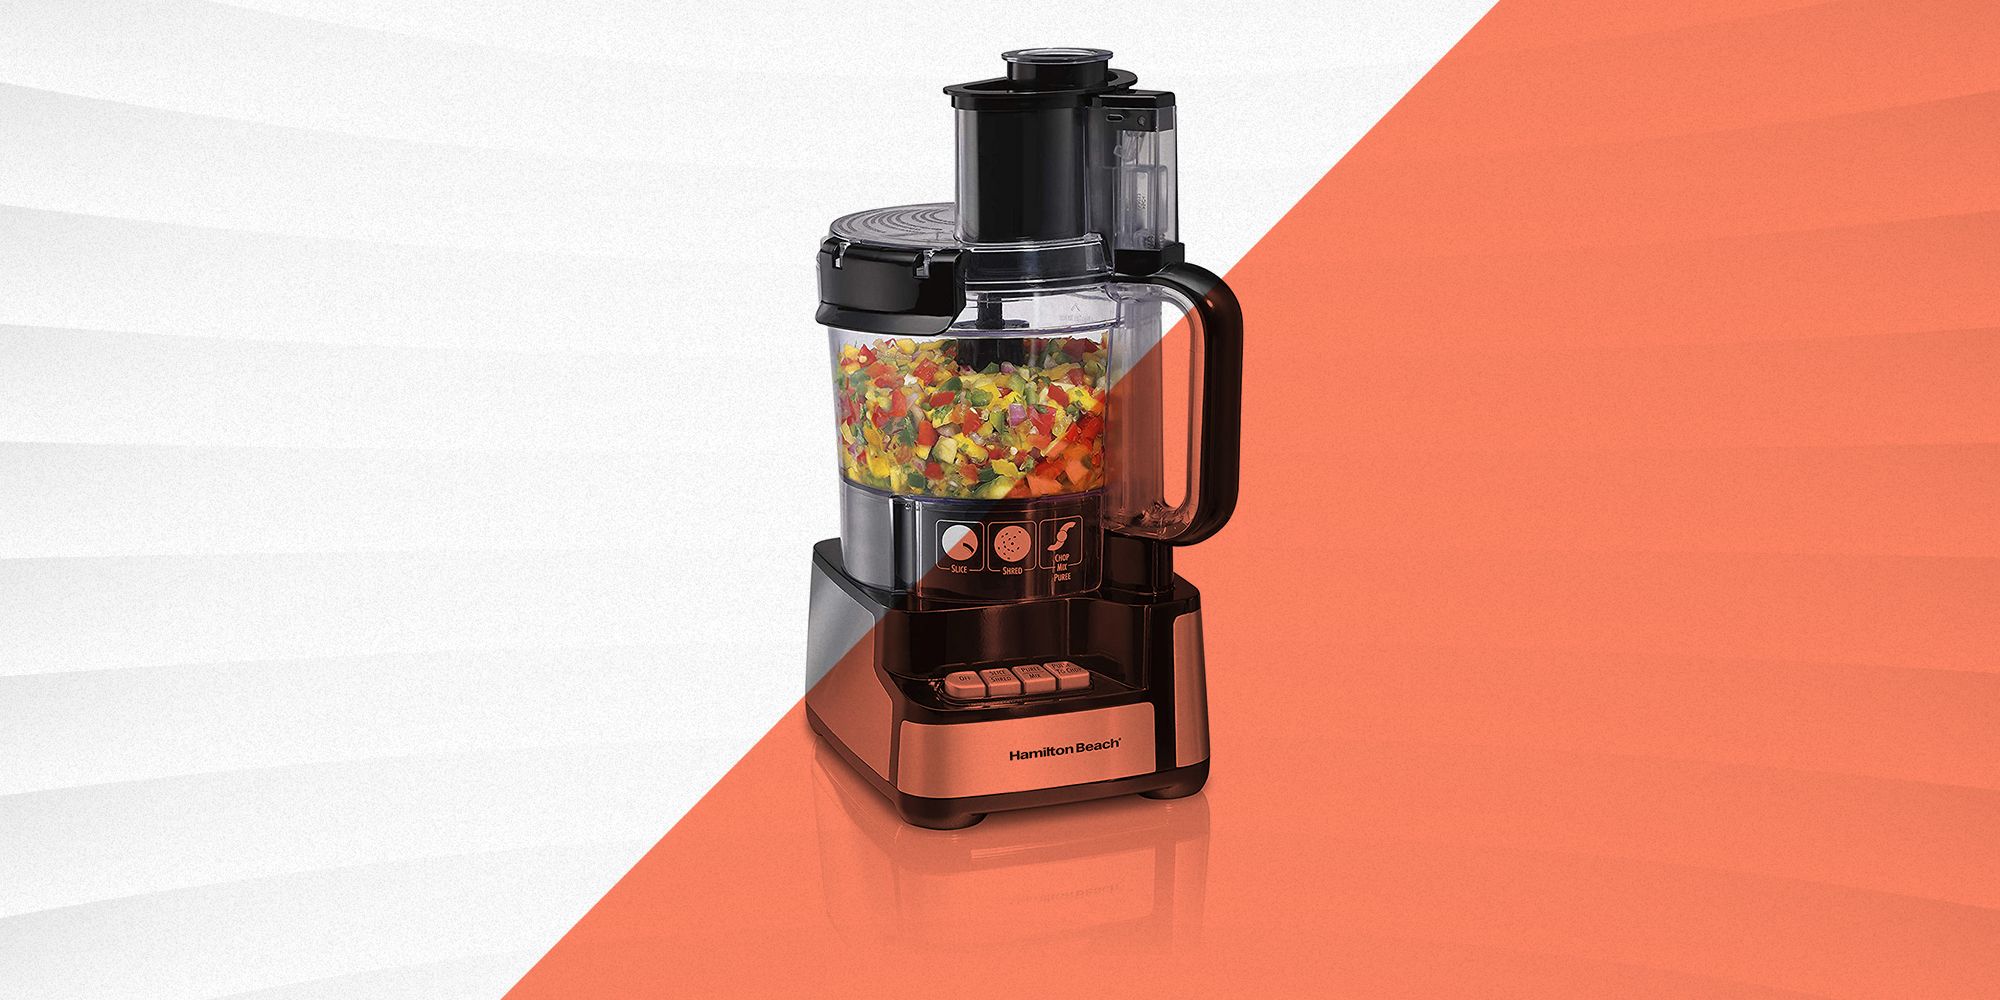 The New Line of Food Processors